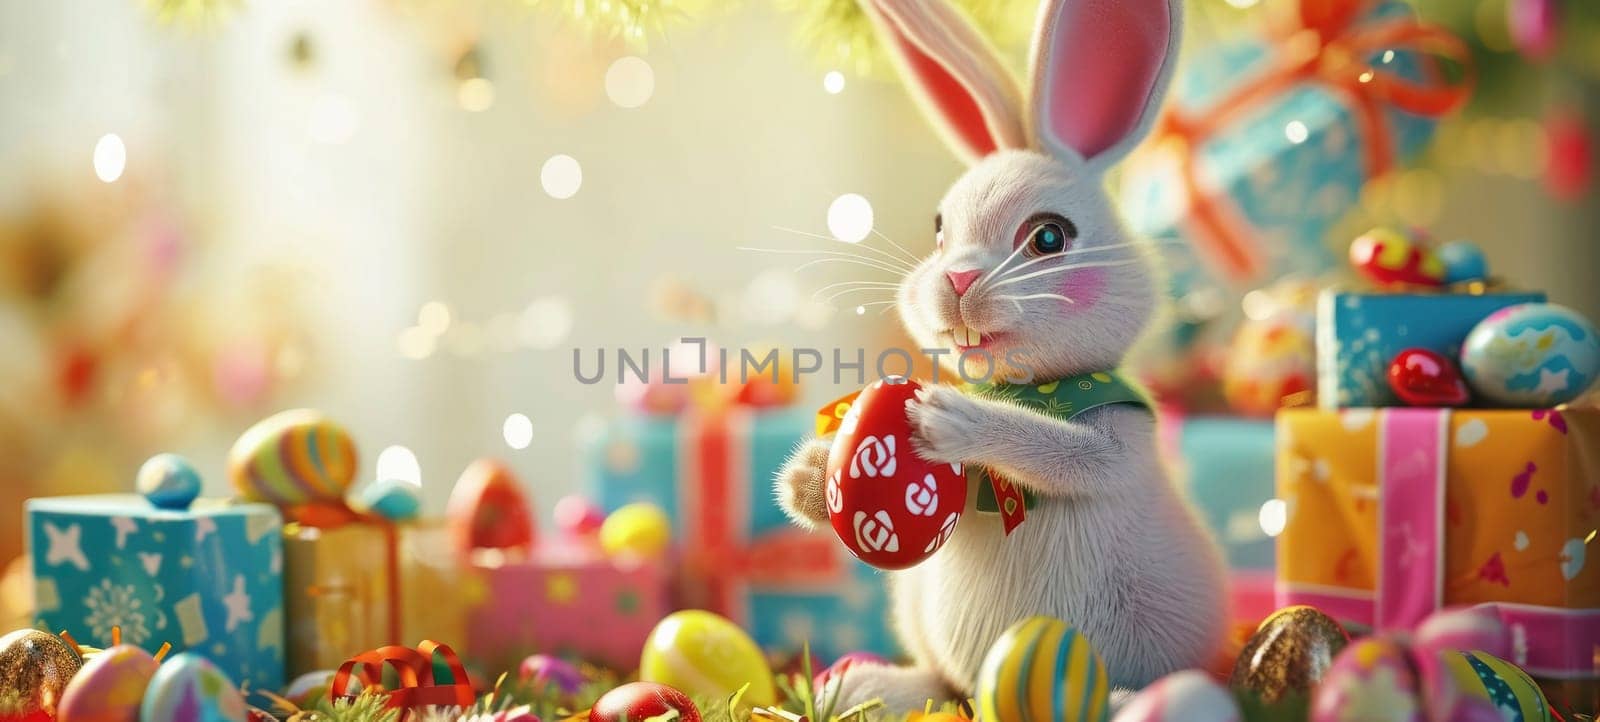 Joyful Easter Bunny with Painted Eggs by andreyz